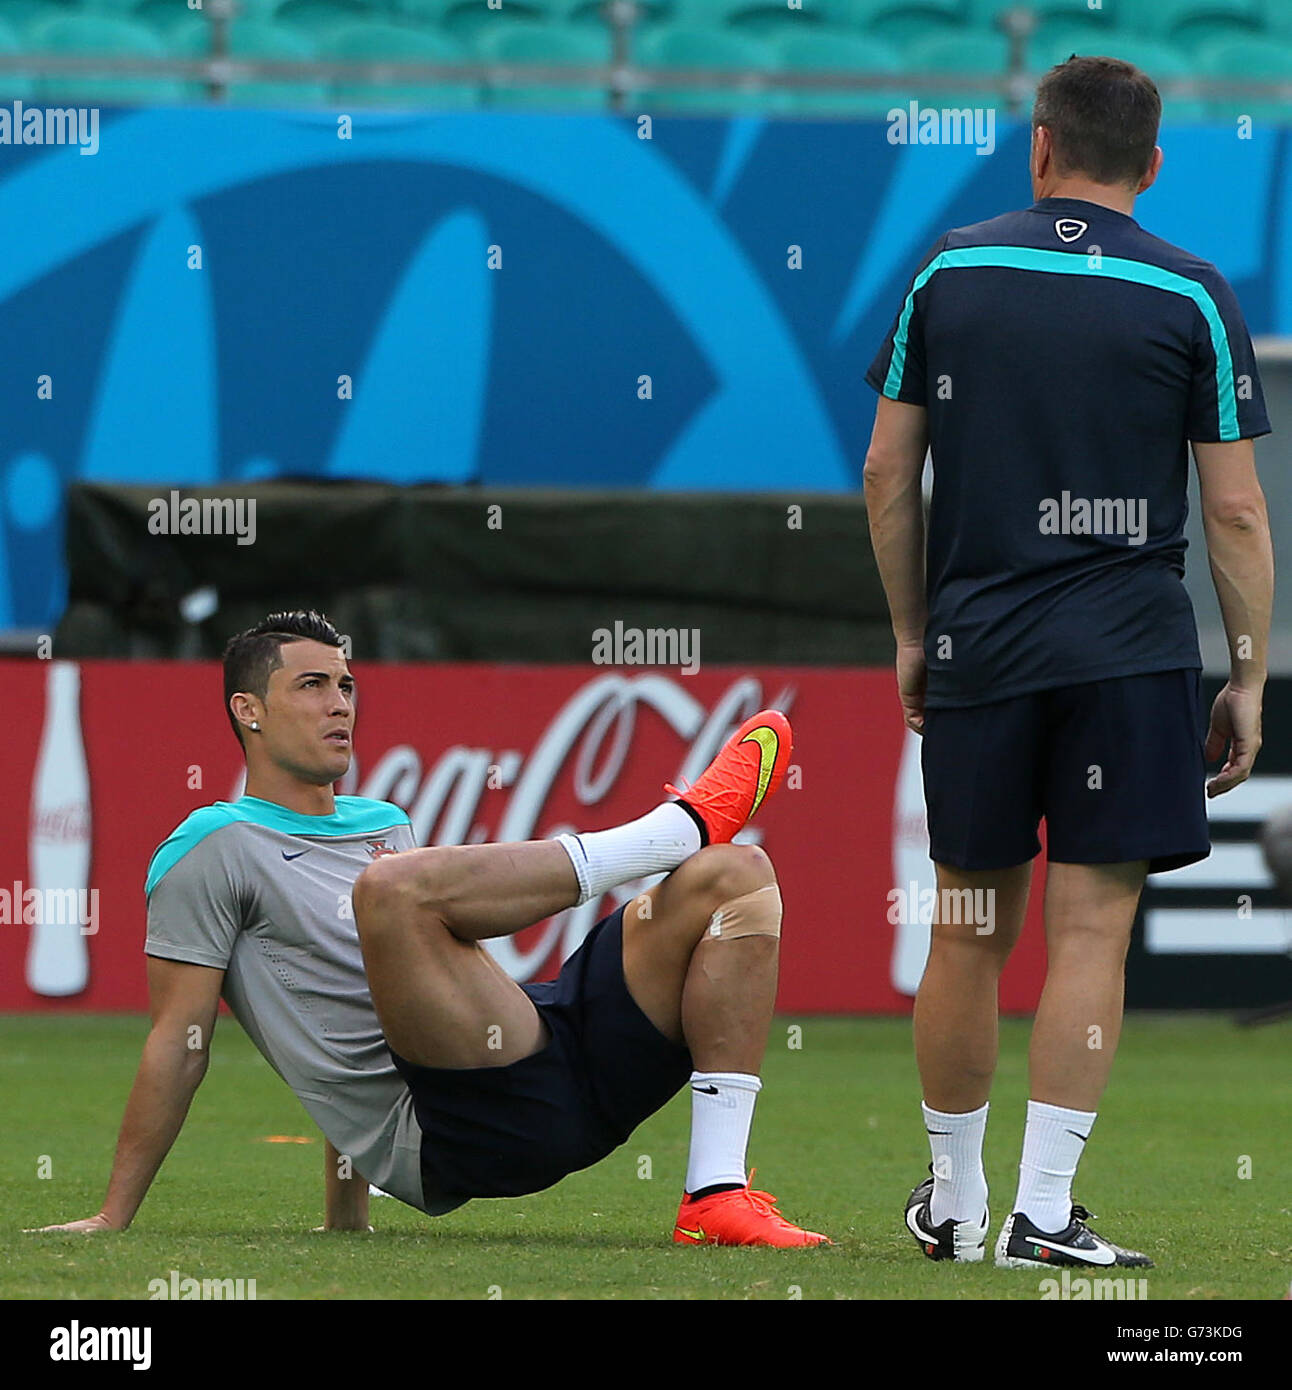 Soccer - FIFA World Cup 2014 - Group G - Germany v Portugal - Portugal Training Session - Arena Fonte Nova. Portugal captain Cristiano Ronaldo speaks with Portugal Manager Paulo Bento during training session ahead of Germany game in Salvador Stock Photo